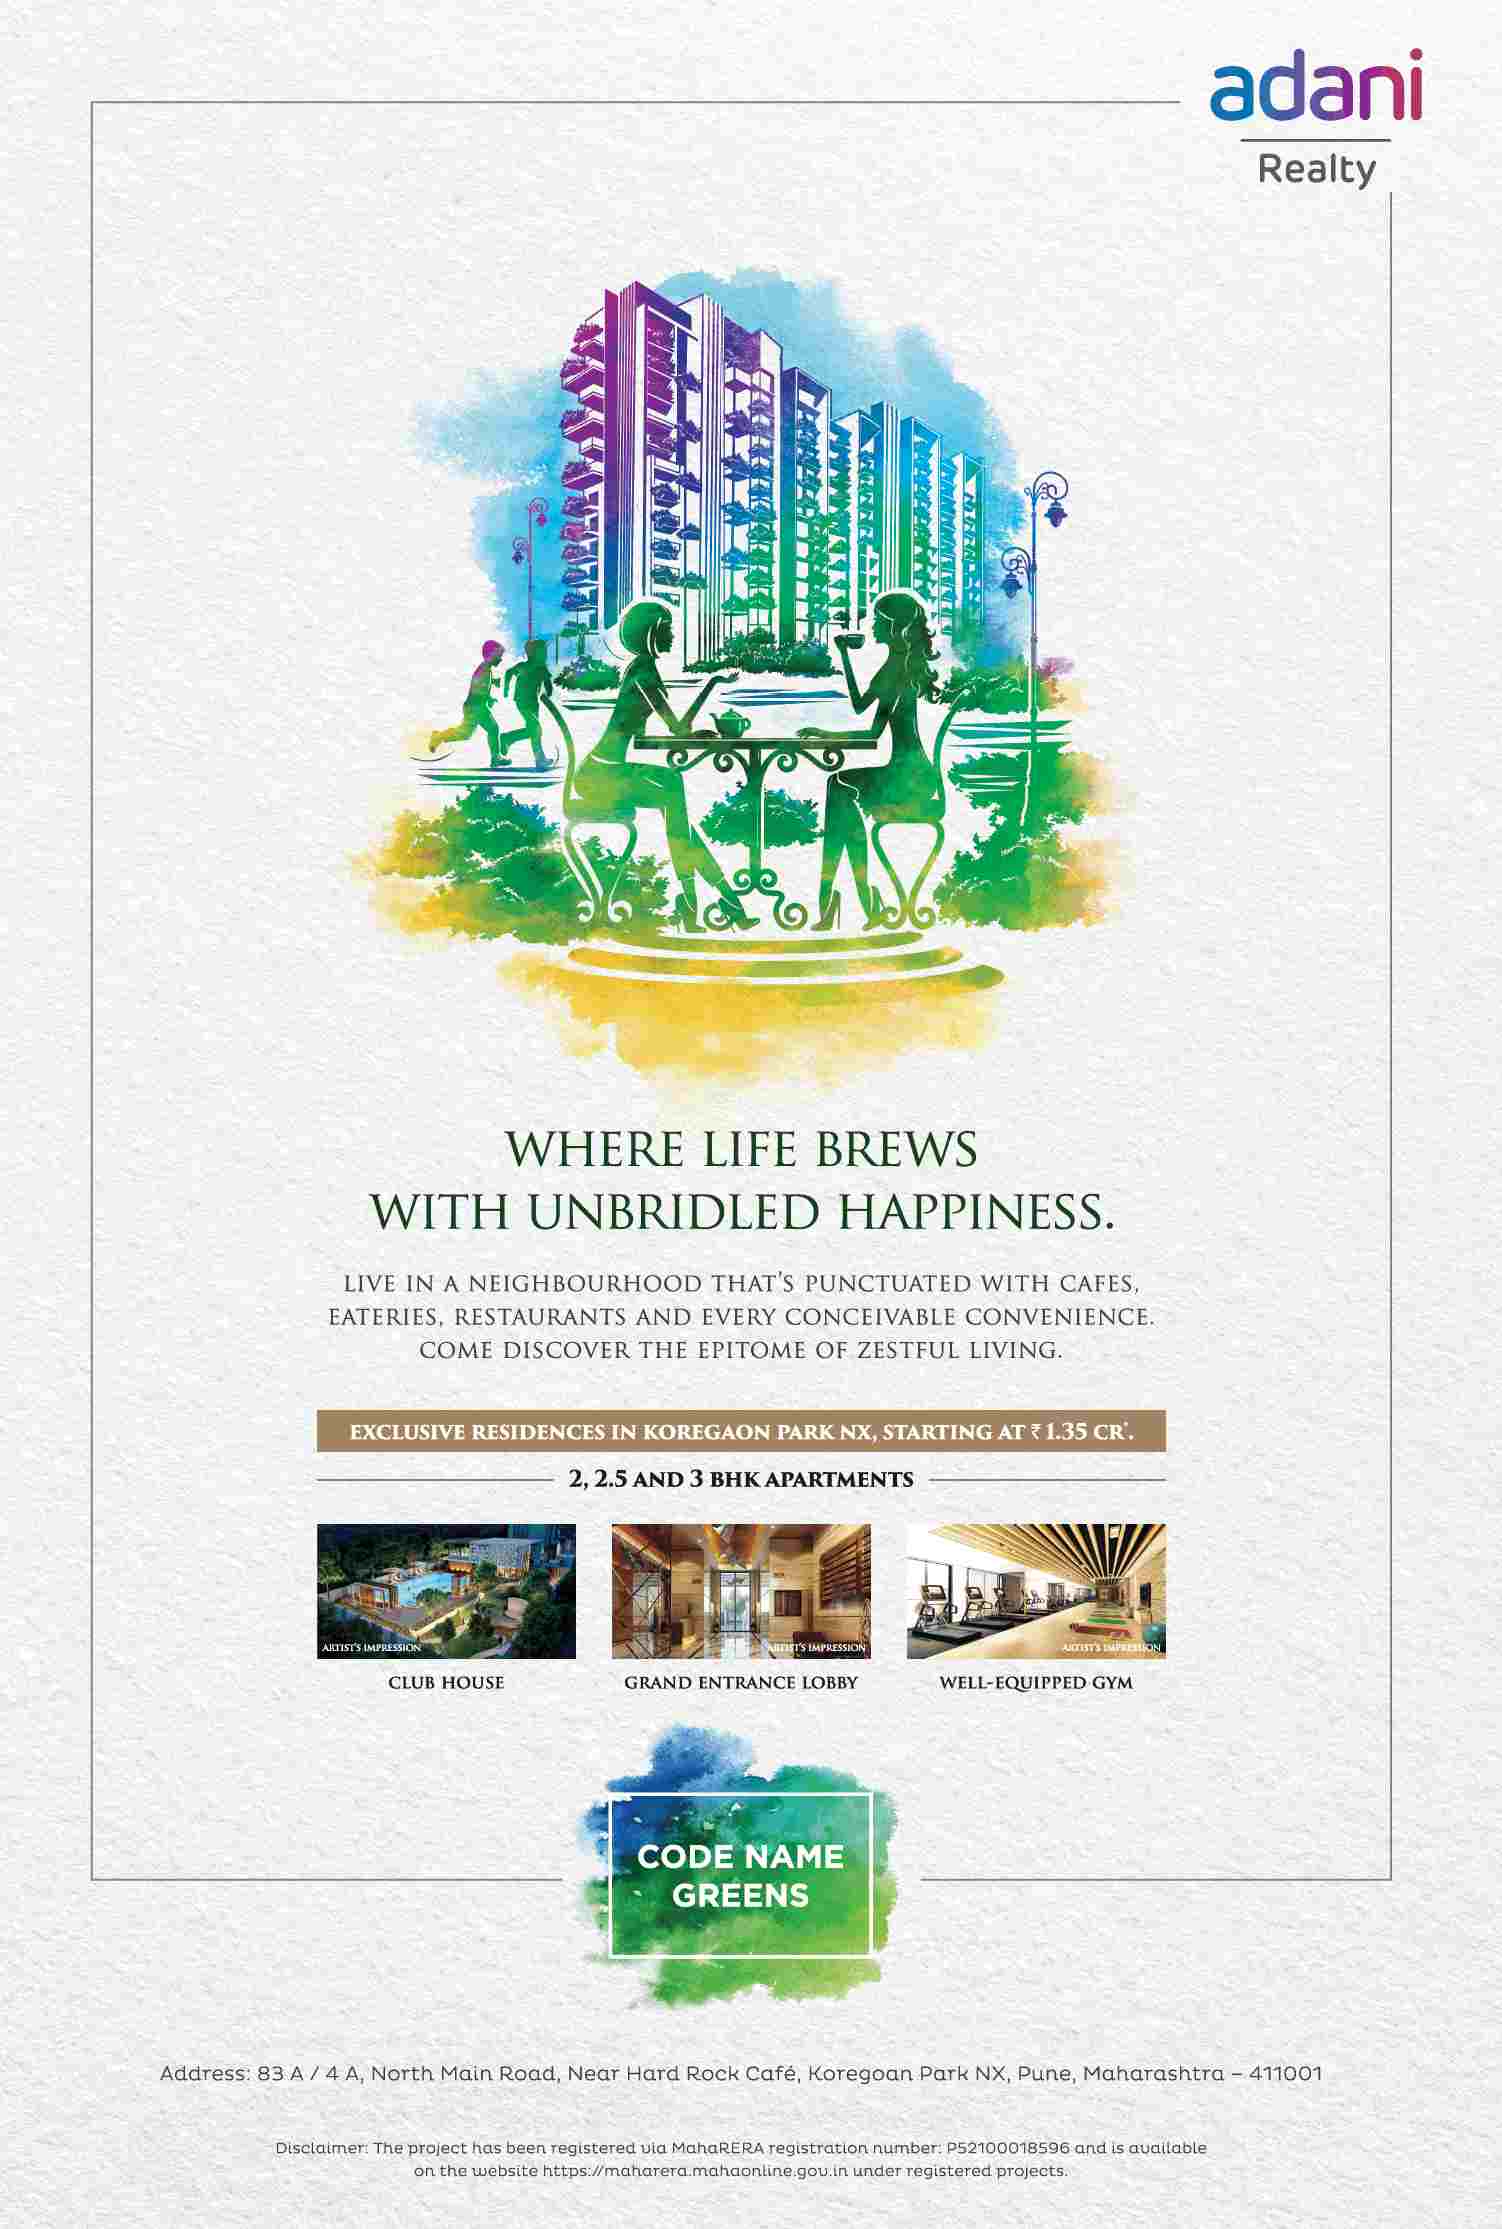 Discover the epitome of zestful living at Adani Codename Greens in Pune Update